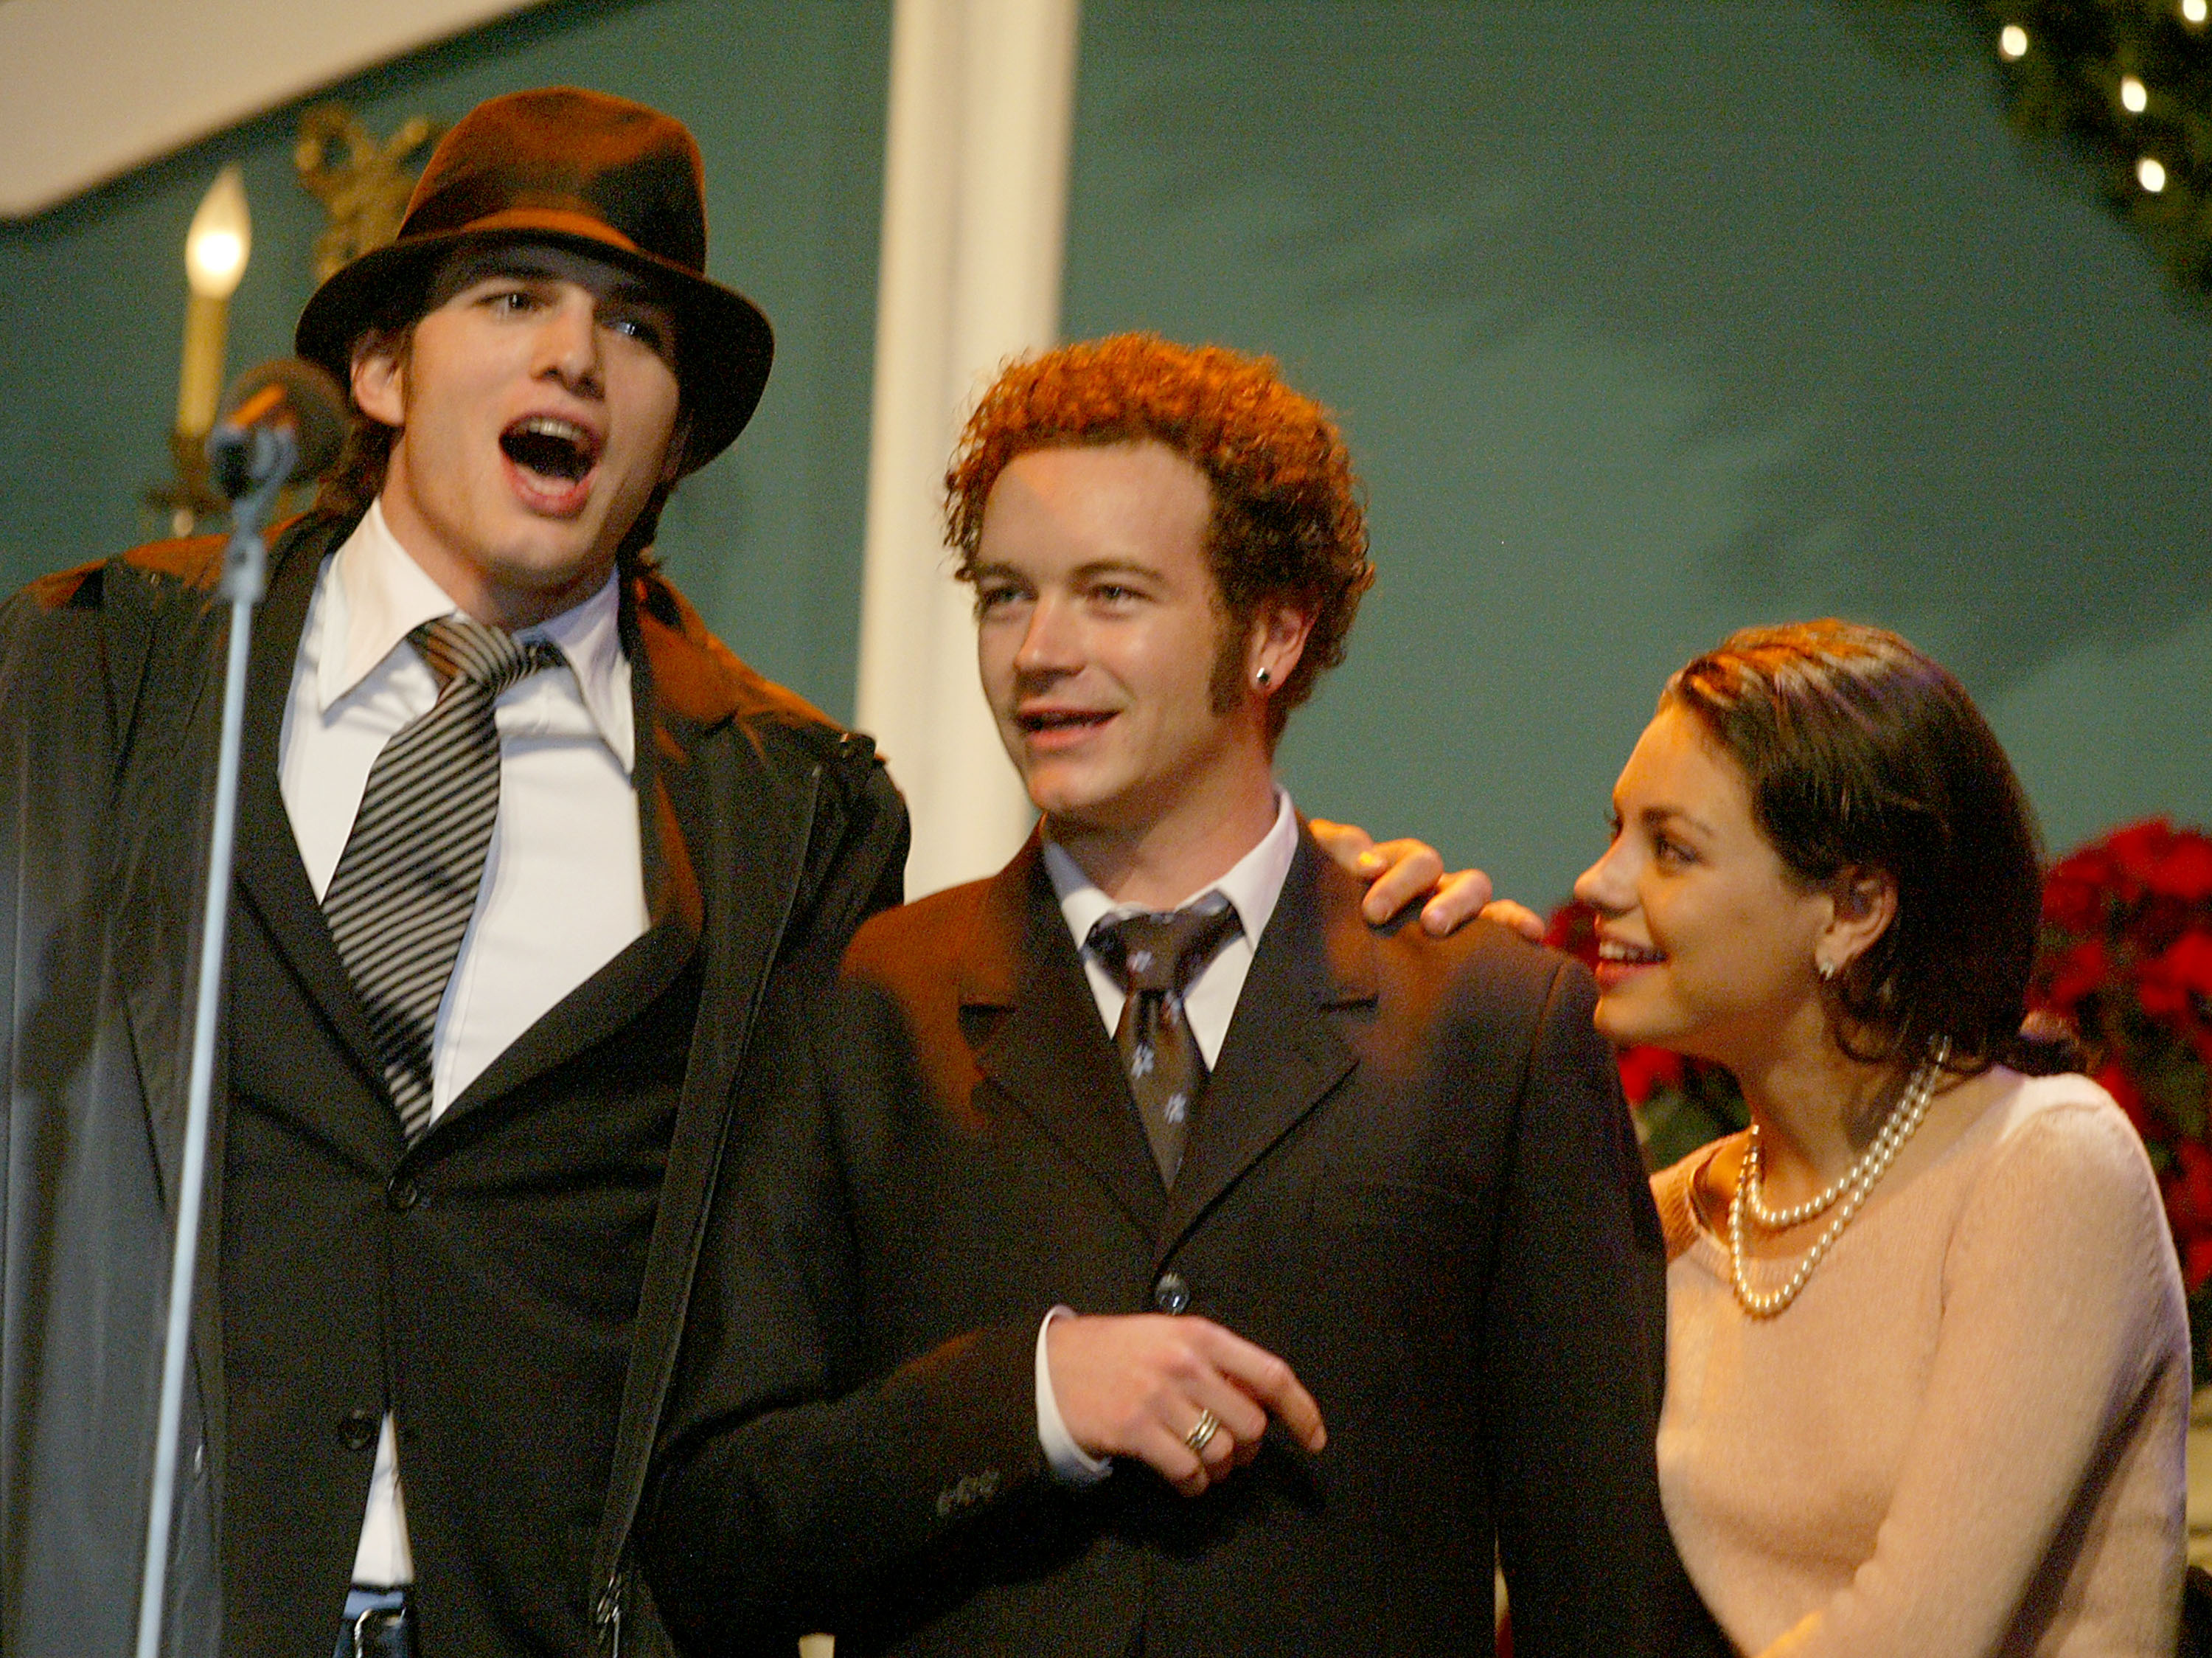 (L-R) Ashton Kutcher, Danny Masterson and Mila Kunis perform on stage at the Church of Scientology's 11th Annual Christmas Stories Fundraiser on December 6, 2003 in Los Angeles, California | Source: Getty Images